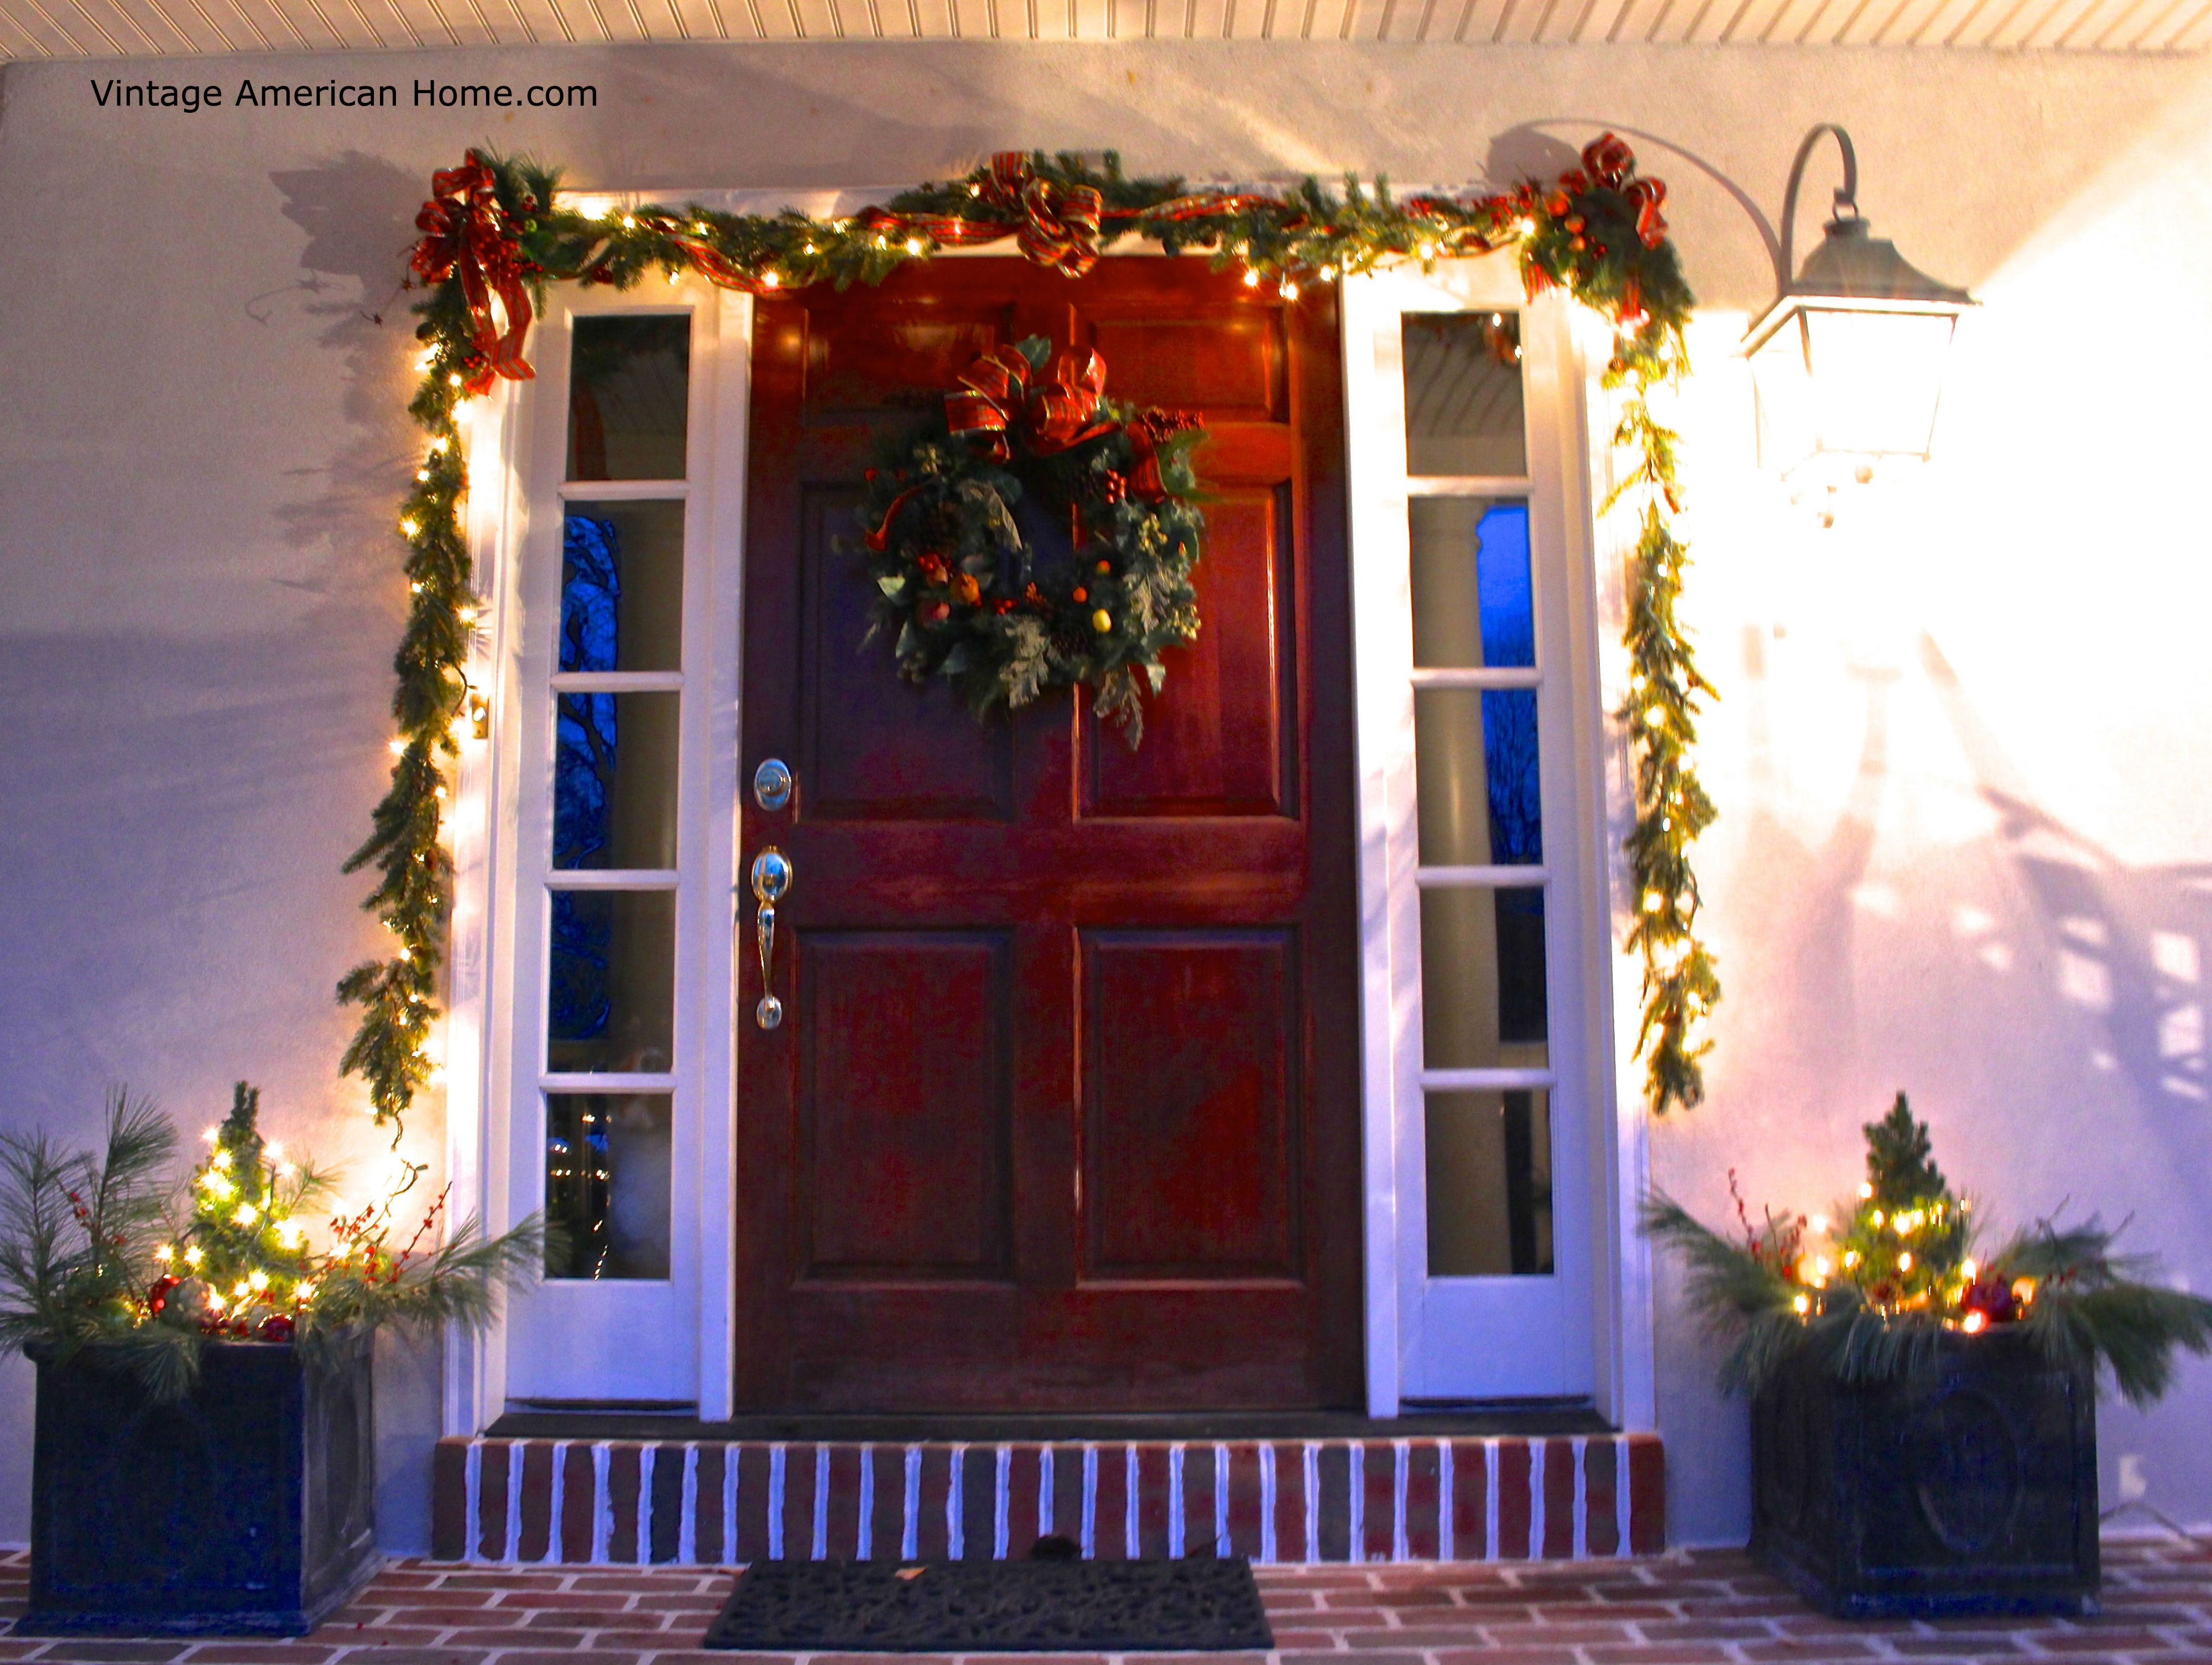 41+ Pictures Of Homes Decorated For Christmas Images - fendernocasterrightnow